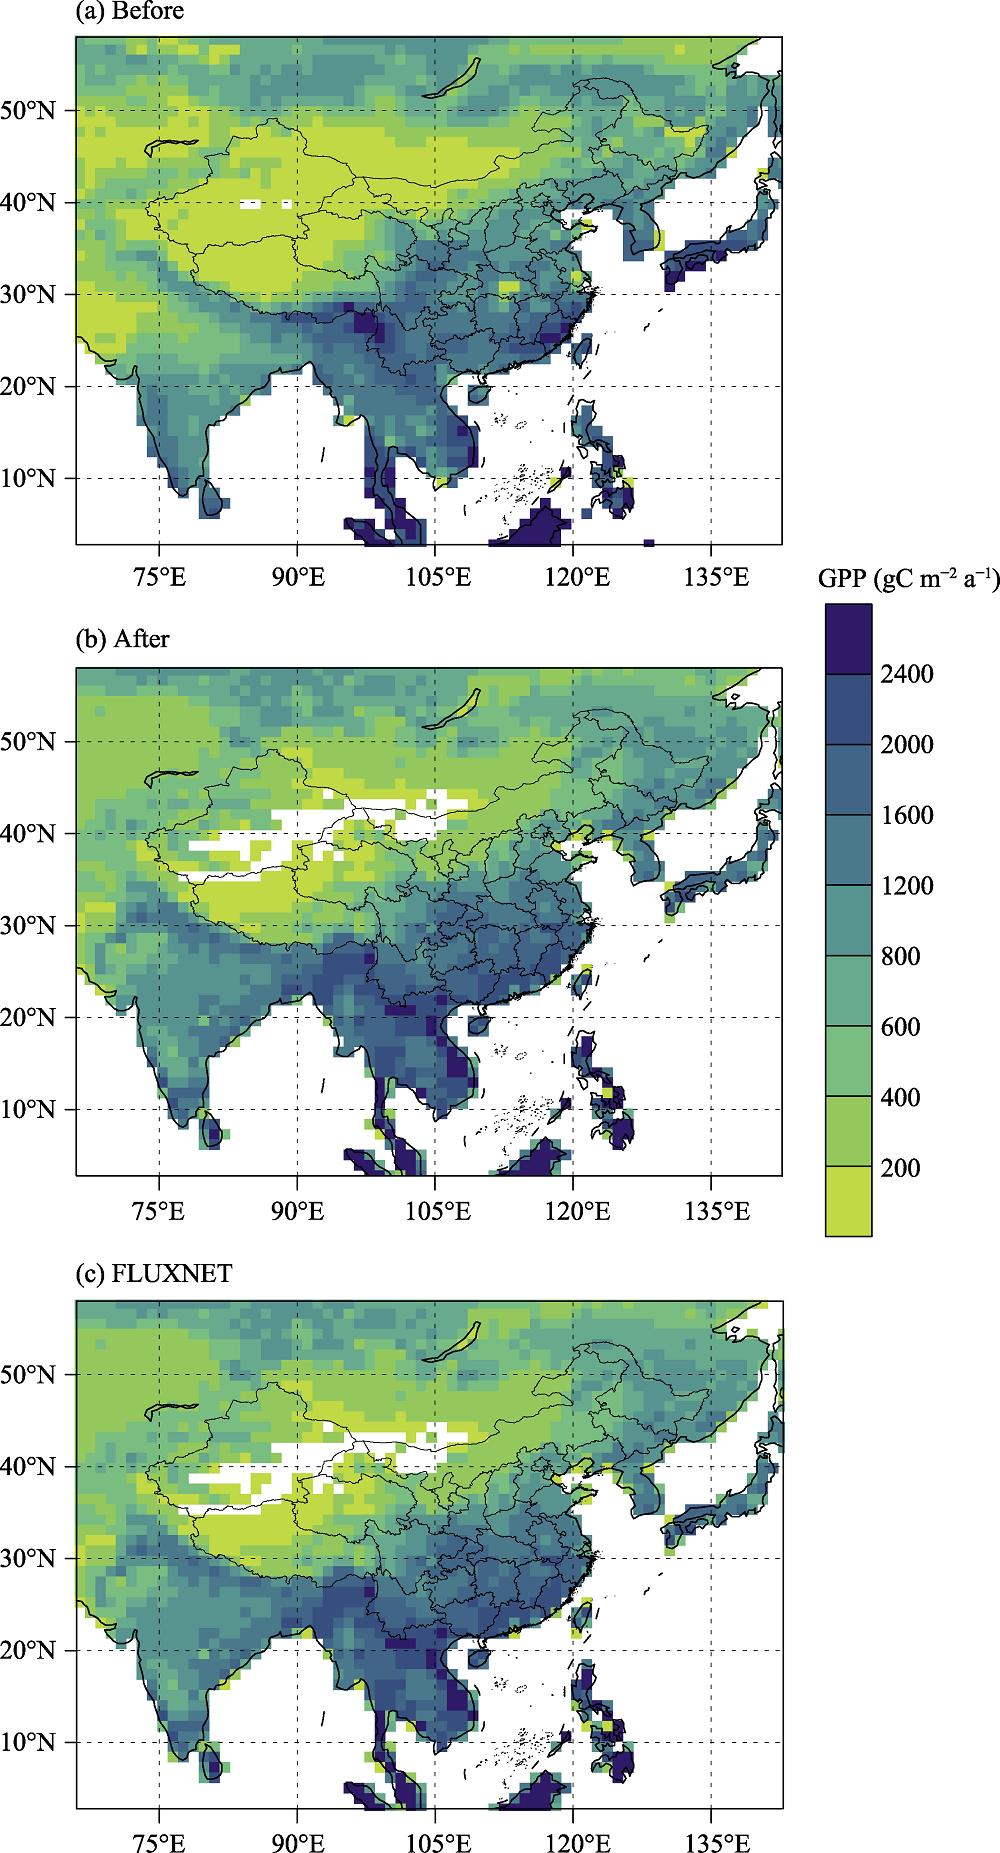 Annual mean GPP distribution (gC m-2 a-1) during 1980-2013 with BCC-CSM2 before (a) and after (b) quantile mapping, and with observational FLUXNET (c)